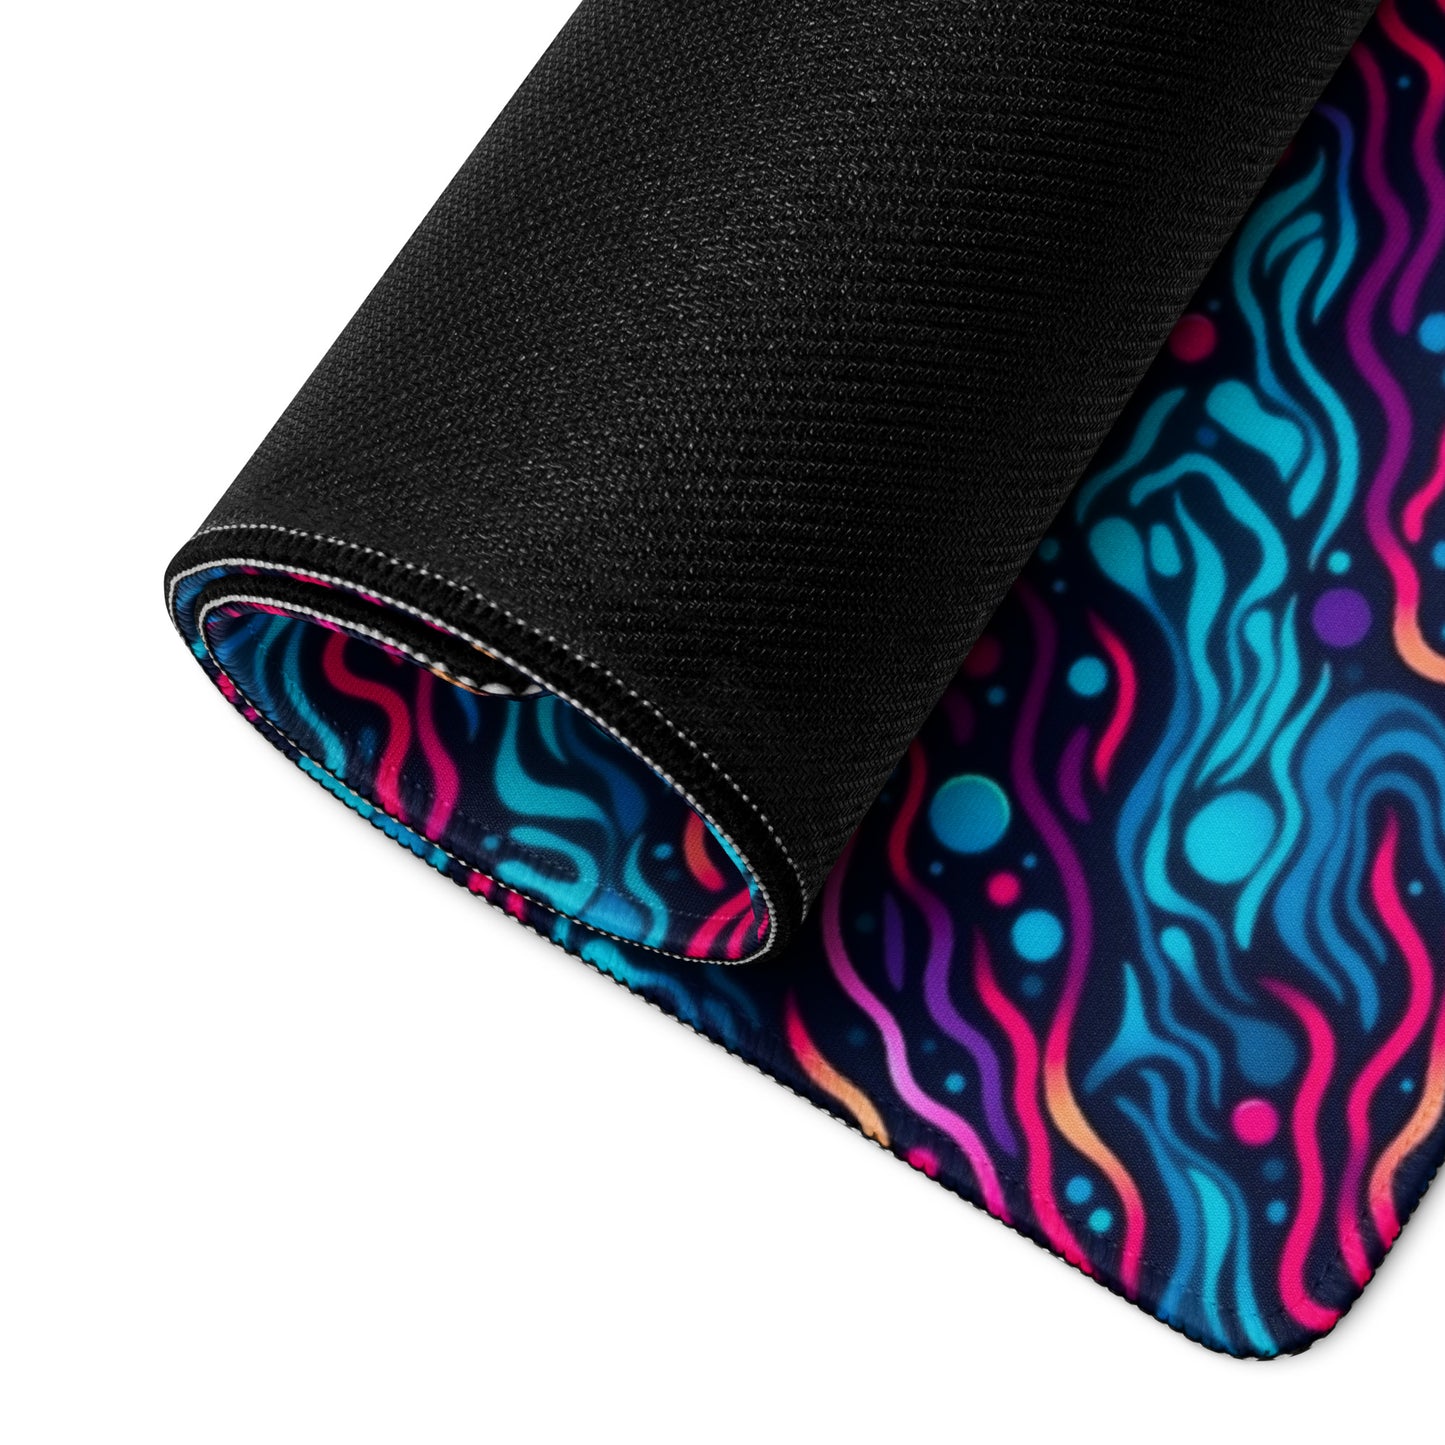 A 36" x 18" desk pad with wavy blue and pink pattern rolled up.